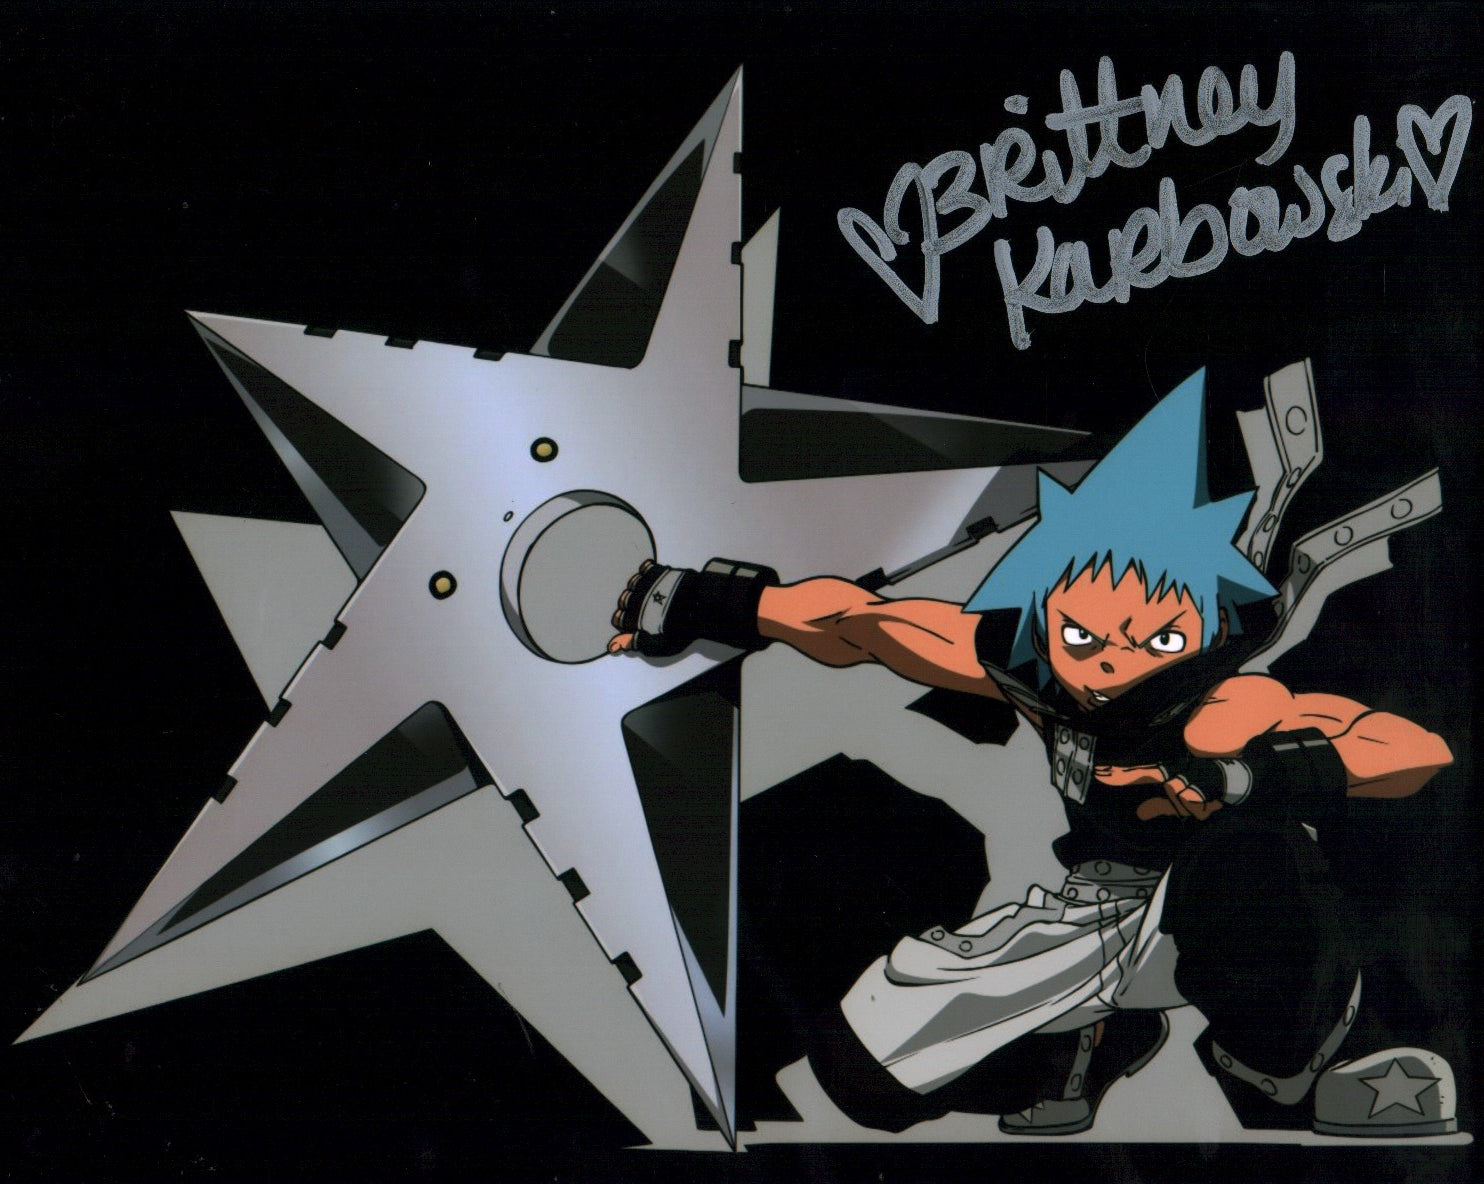 Brittney Karbowski Soul Eater 8x10 Signed Photo JSA Certified Autograph GalaxyCon